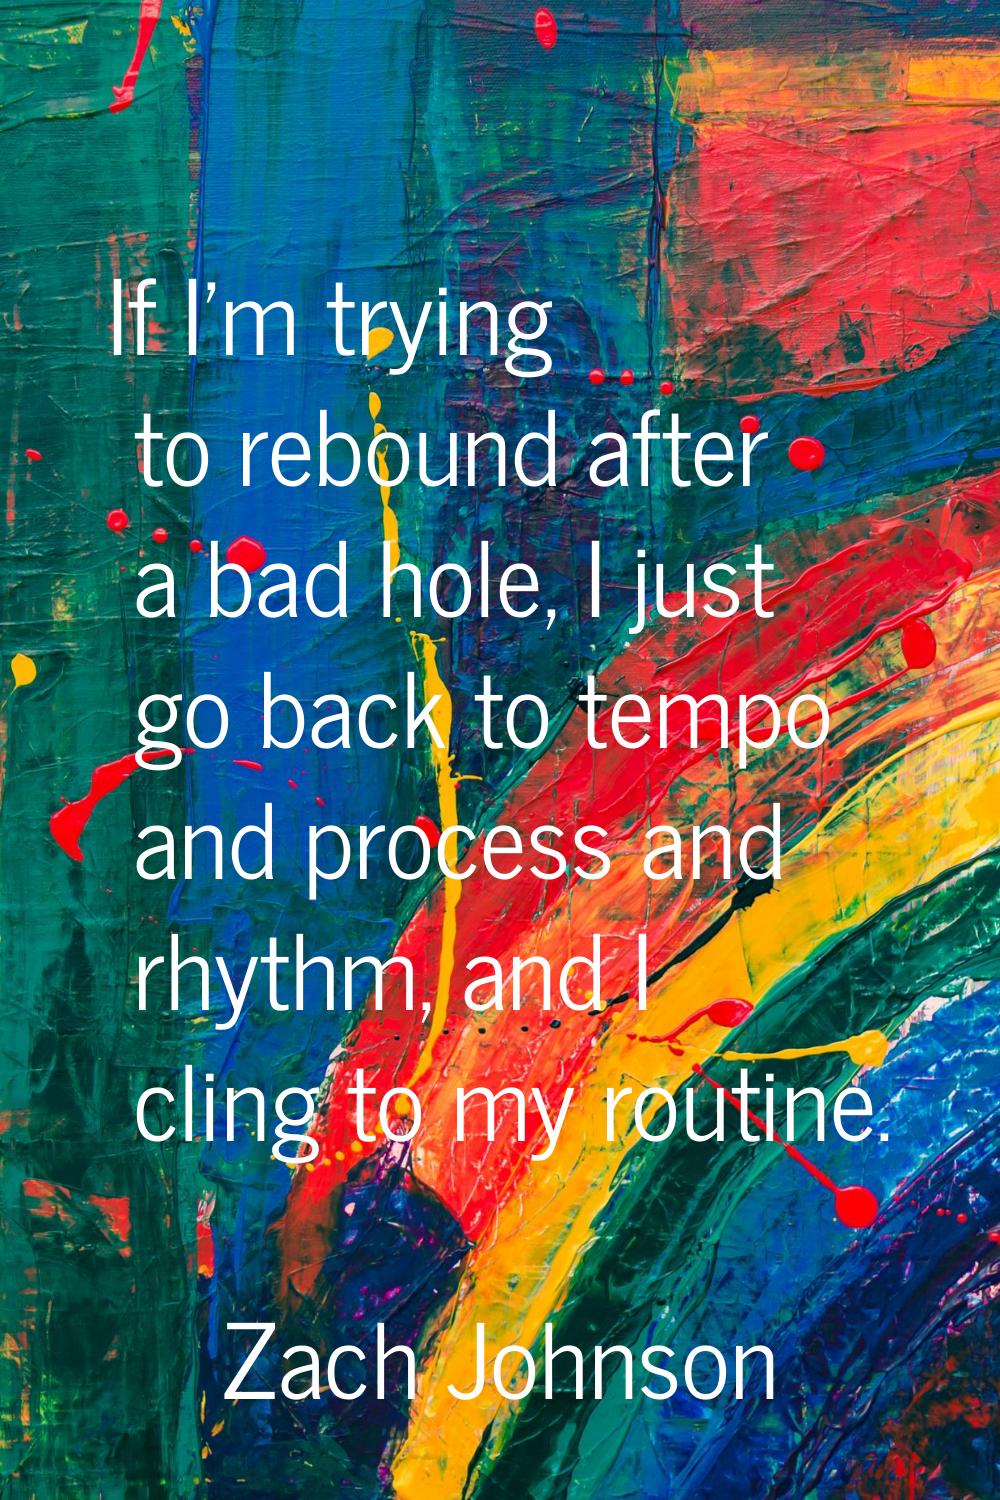 If I'm trying to rebound after a bad hole, I just go back to tempo and process and rhythm, and I cl